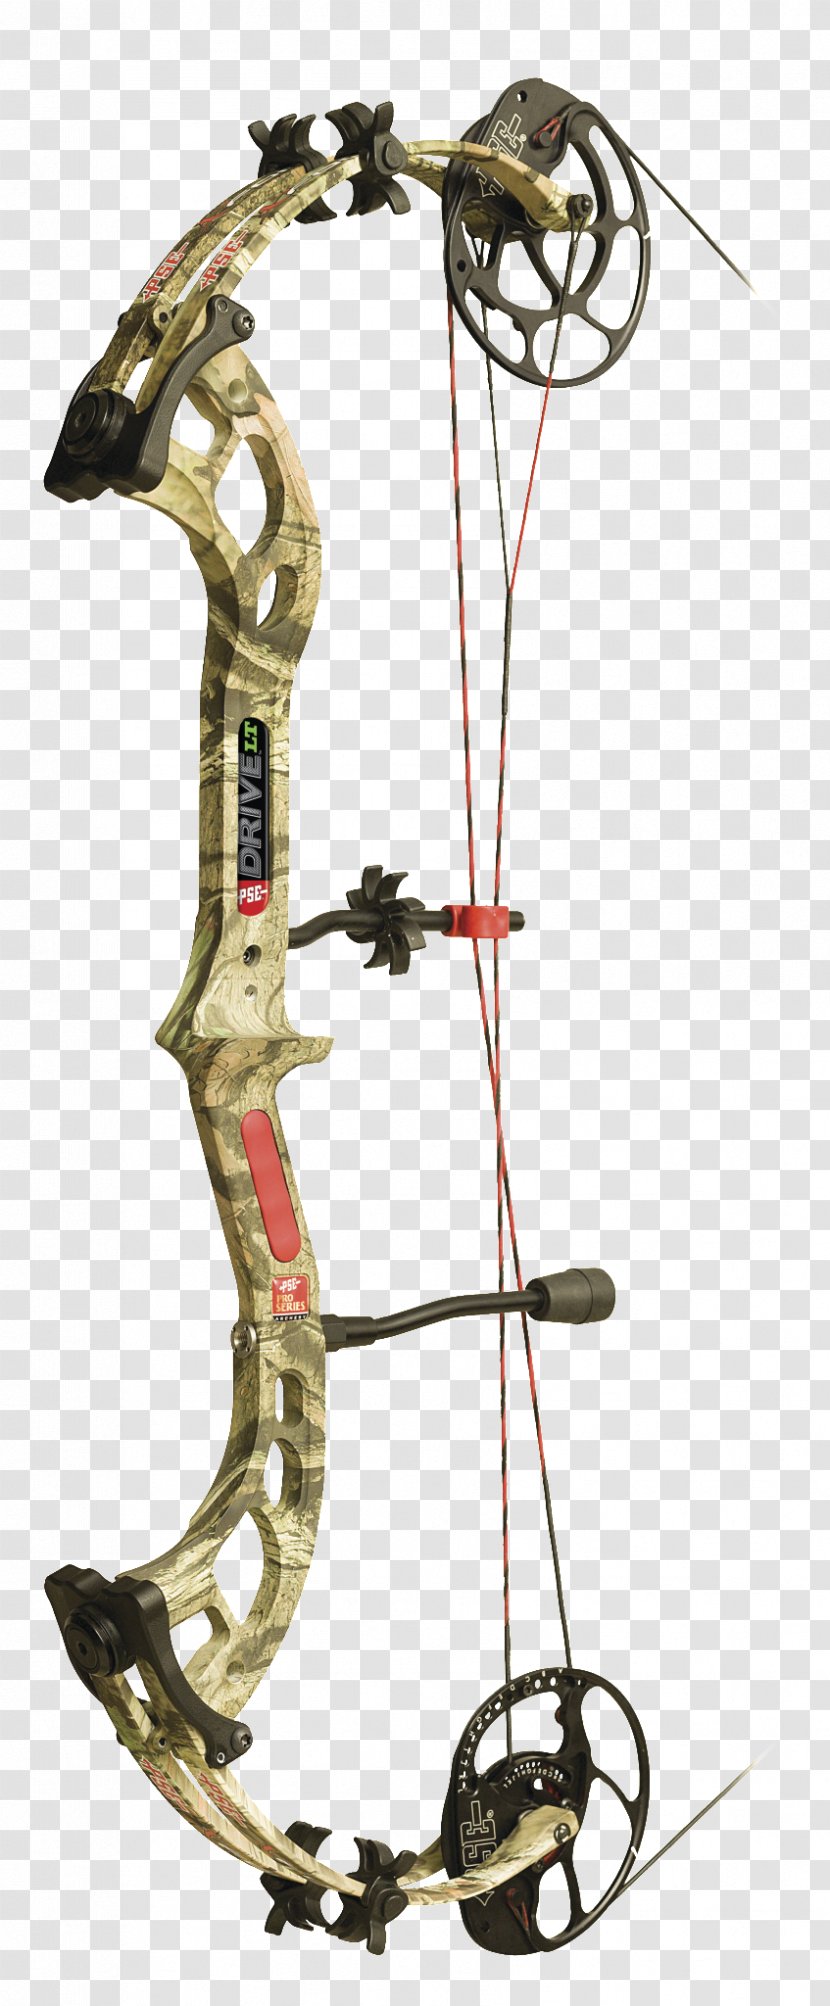 PSE Archery Bow And Arrow Compound Bows Crossbow - Customer Service Transparent PNG